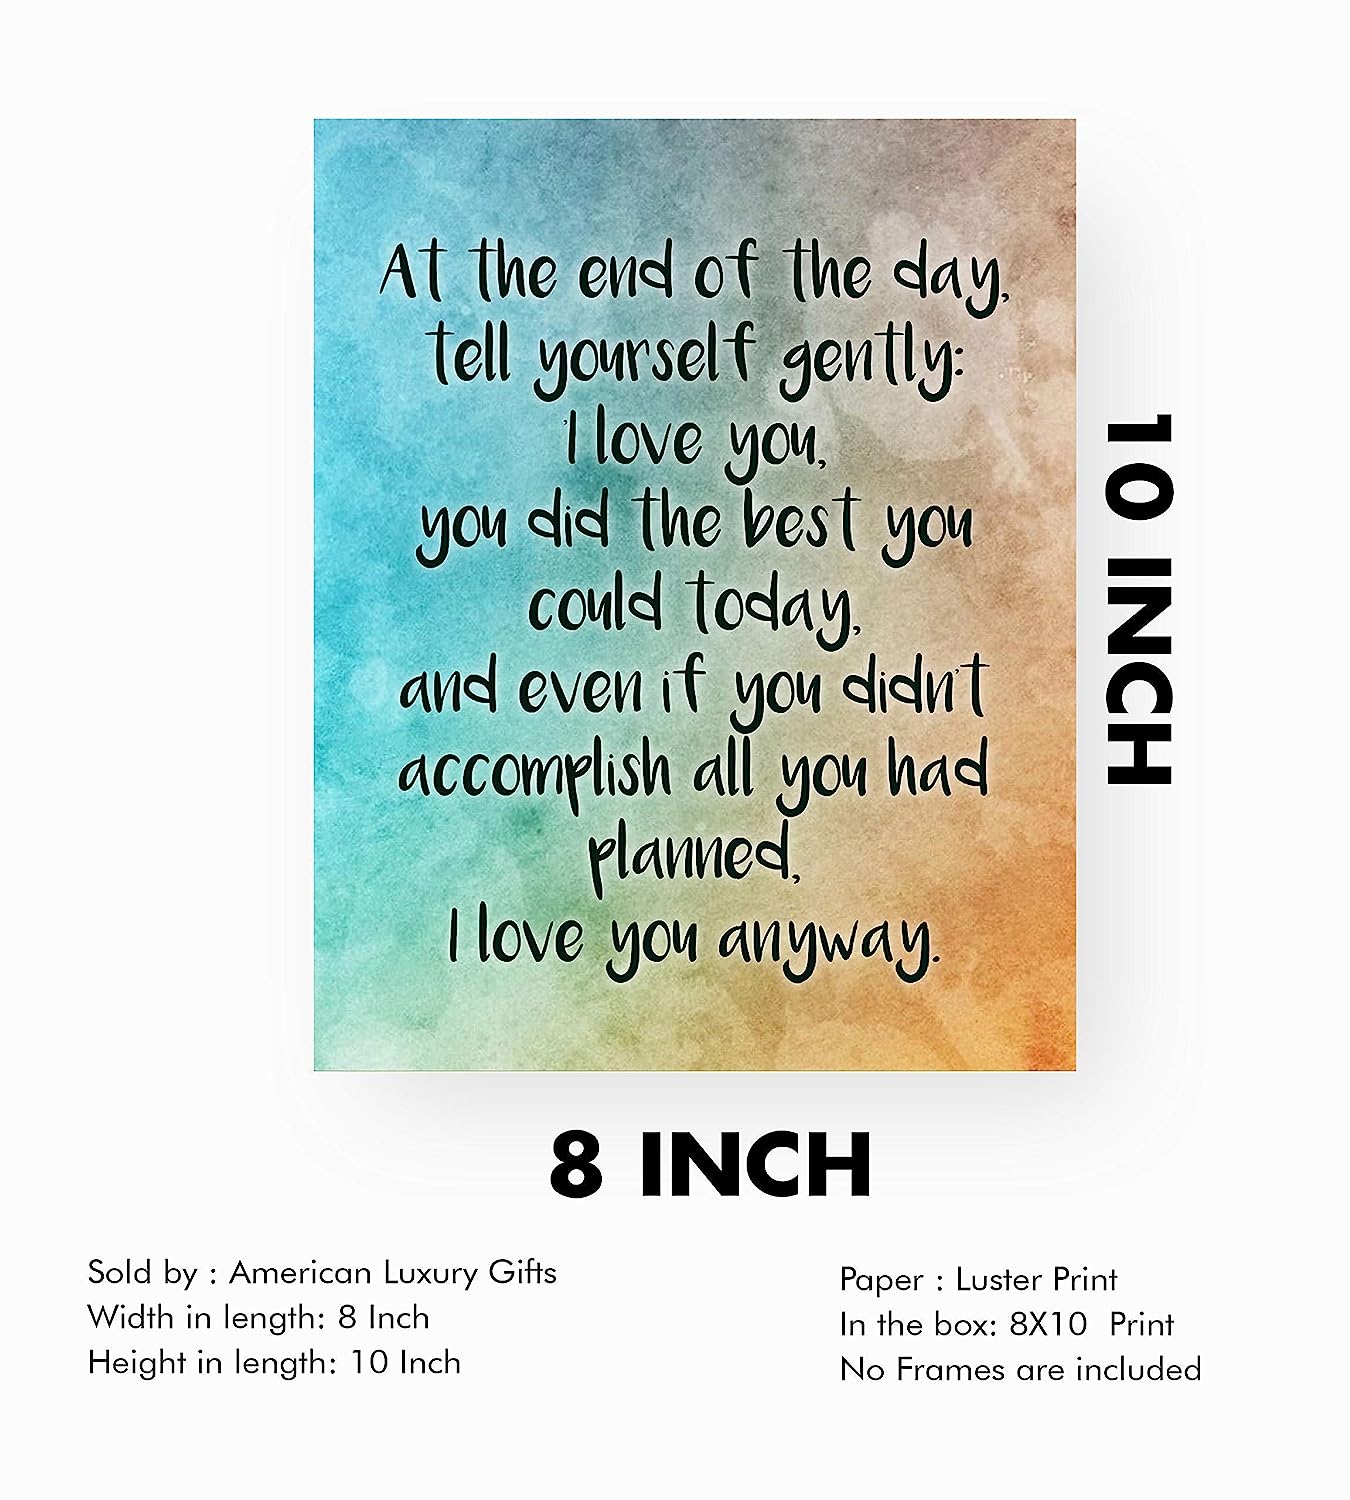 At End of Day Tell Yourself Gently-I Love You Inspirational Quotes Wall Sign -8 x 10" Modern Typographic Art Print-Ready to Frame. Home-Office-School Decor. Great Gift to Inspire Self-Love!